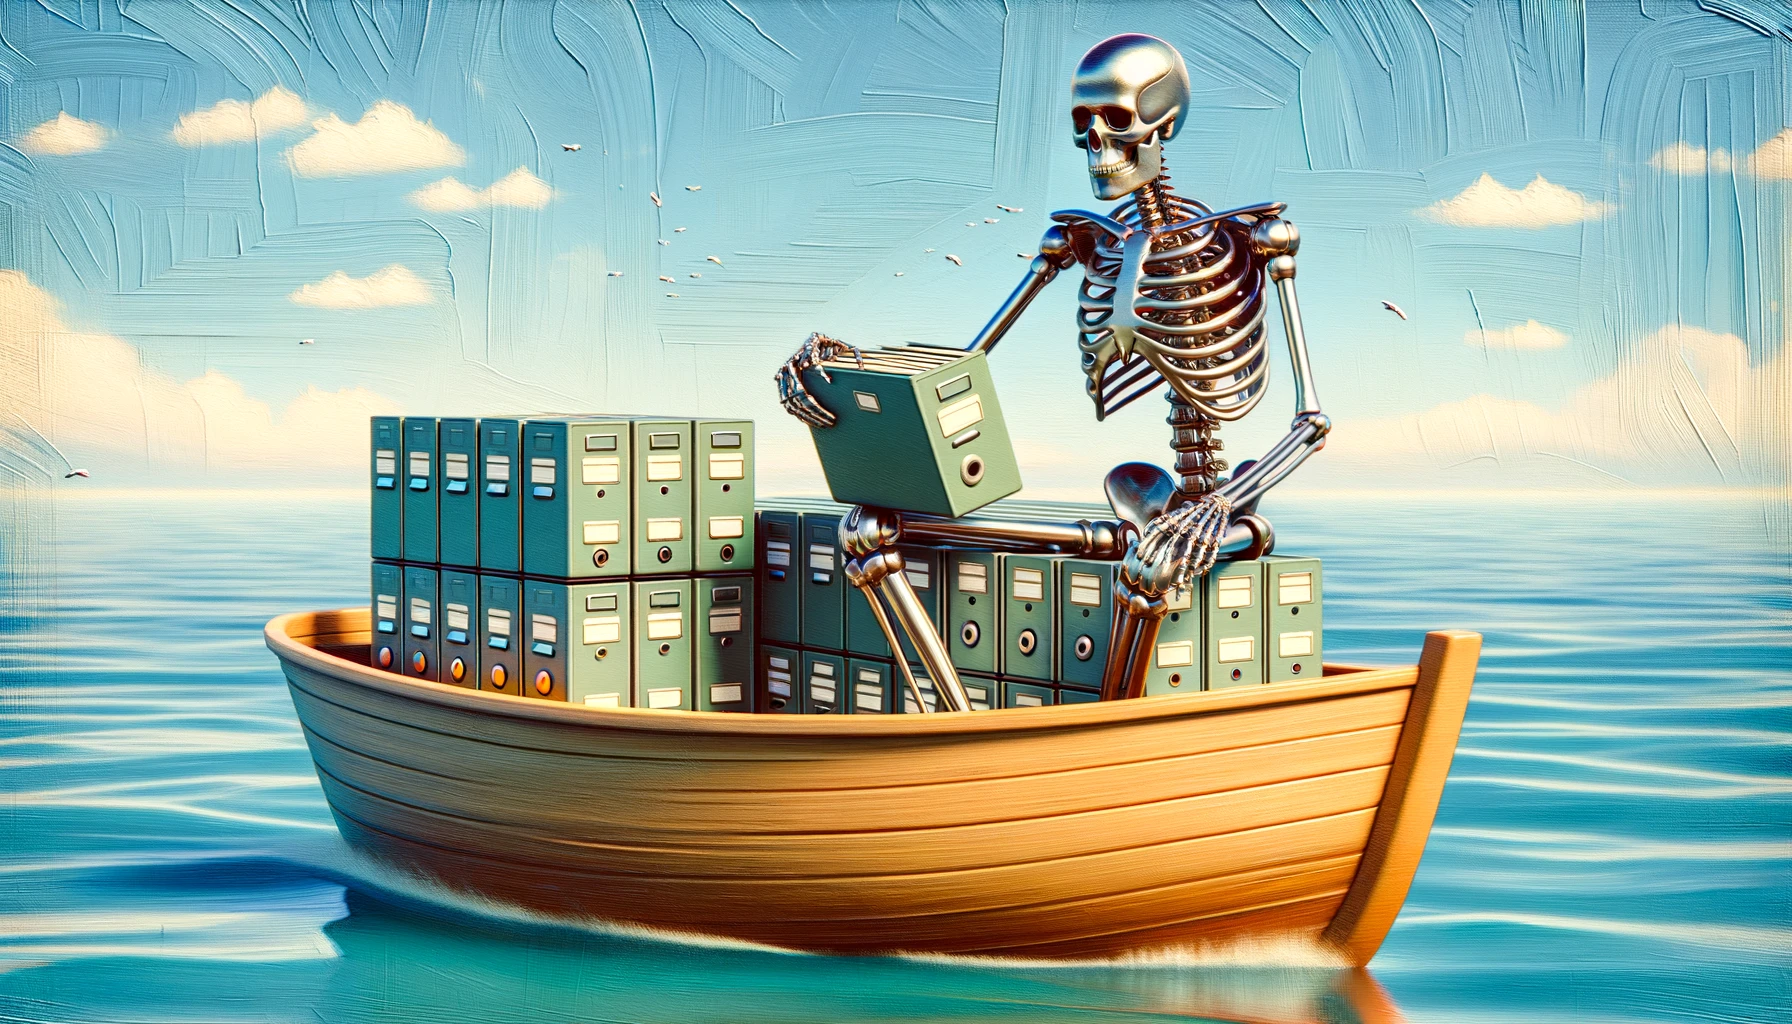 skelly sorting files on a boat